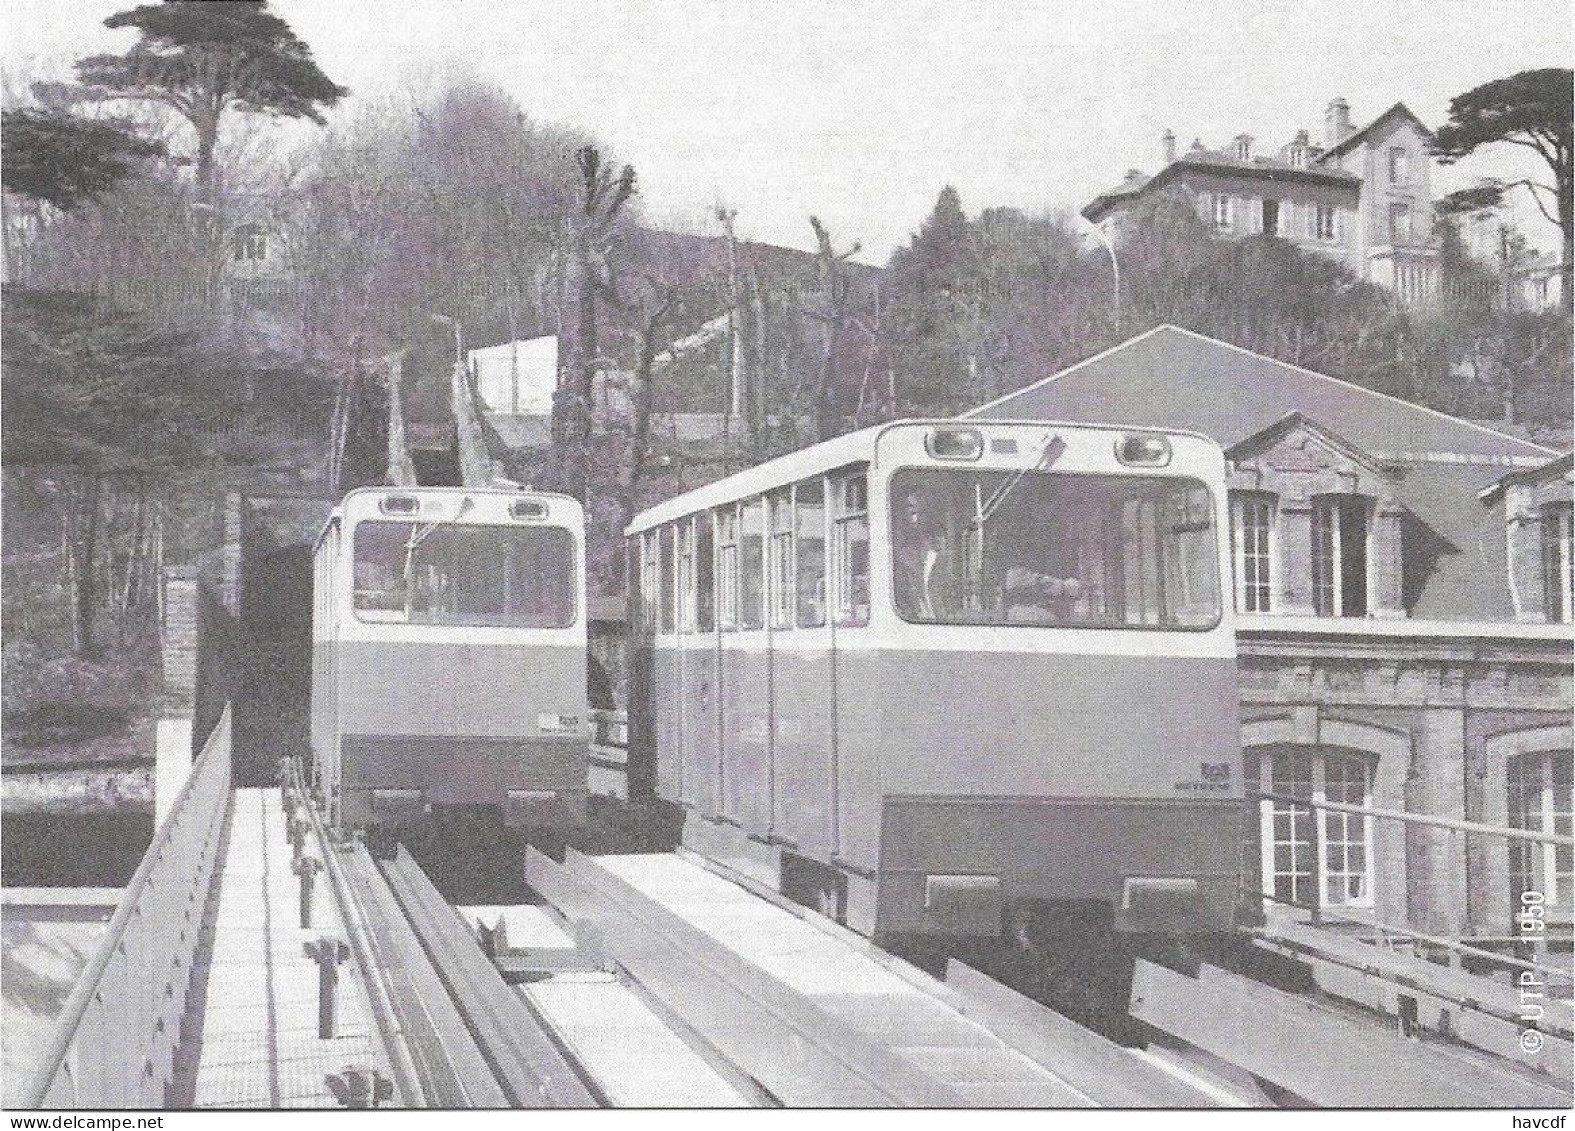 CPM - Funiculaire Du Havre - 1950 - Funicular Railway